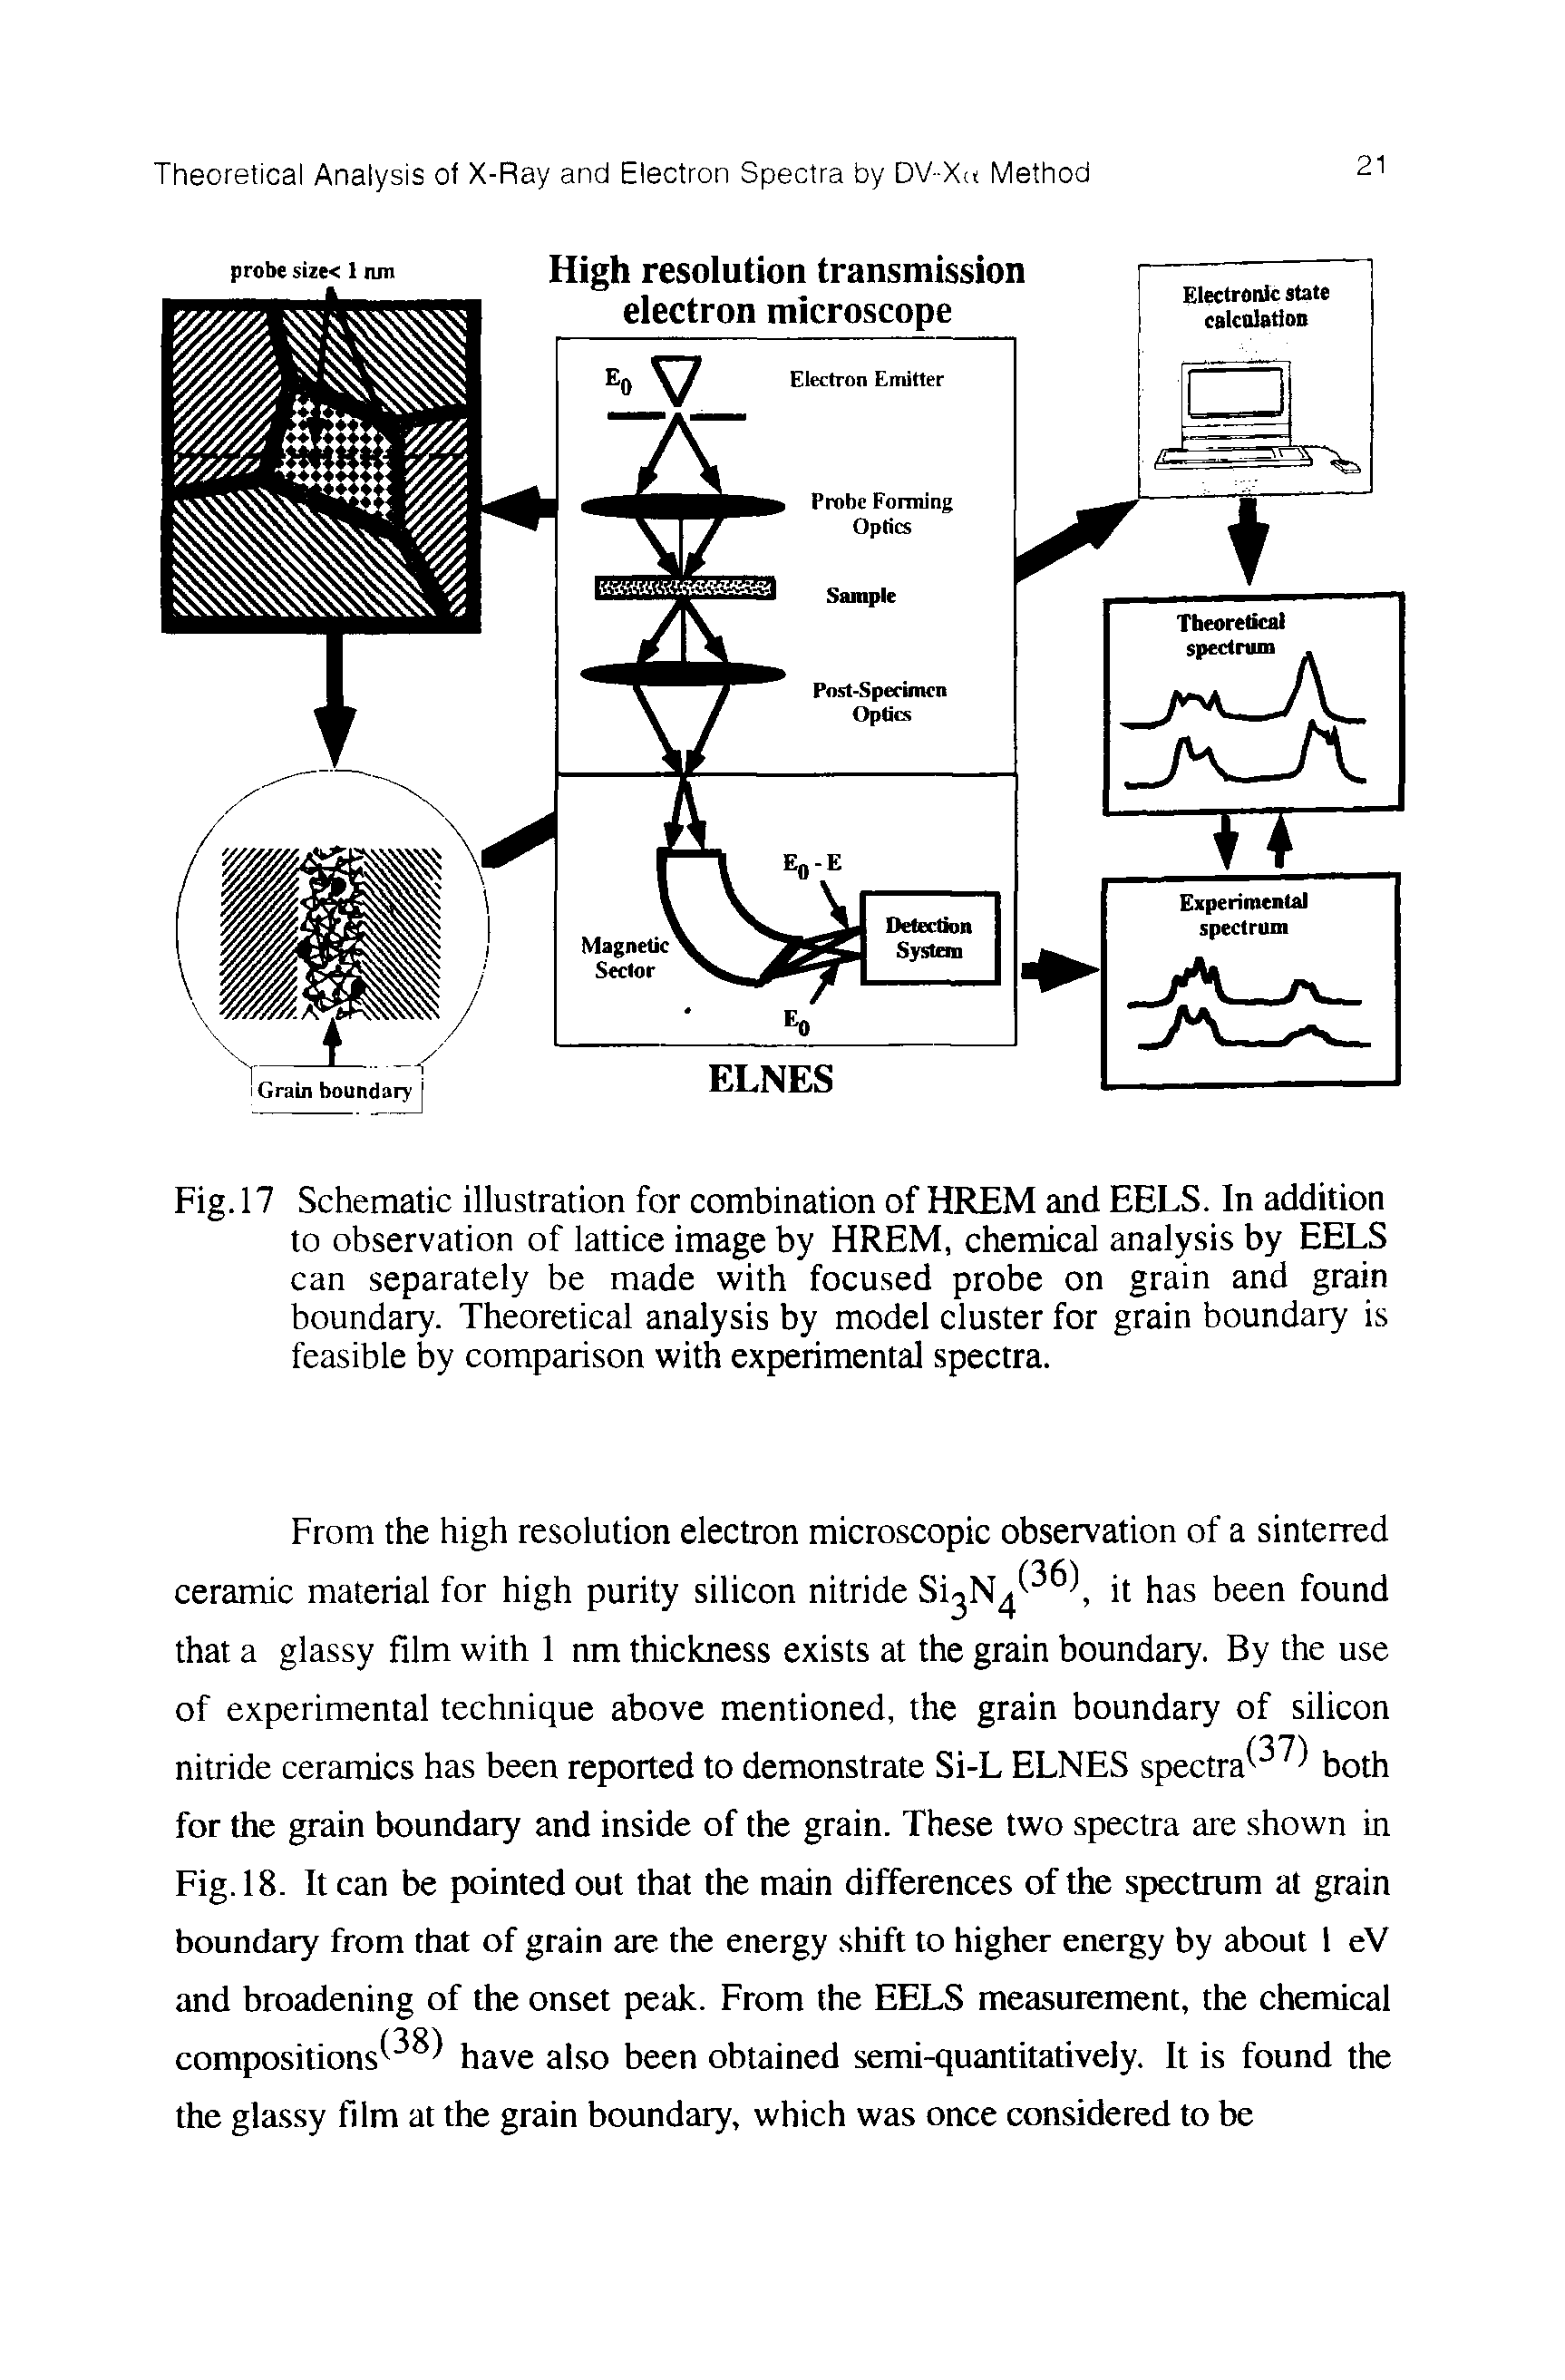 Fig. 17 Schematic illustration for combination of HREM and EELS. In addition to observation of lattice image by HREM, chemical analysis by EELS can separately be made with focused probe on grain and grain boundary. Theoretical analysis by model cluster for grain boundary is feasible by comparison with experimental spectra.